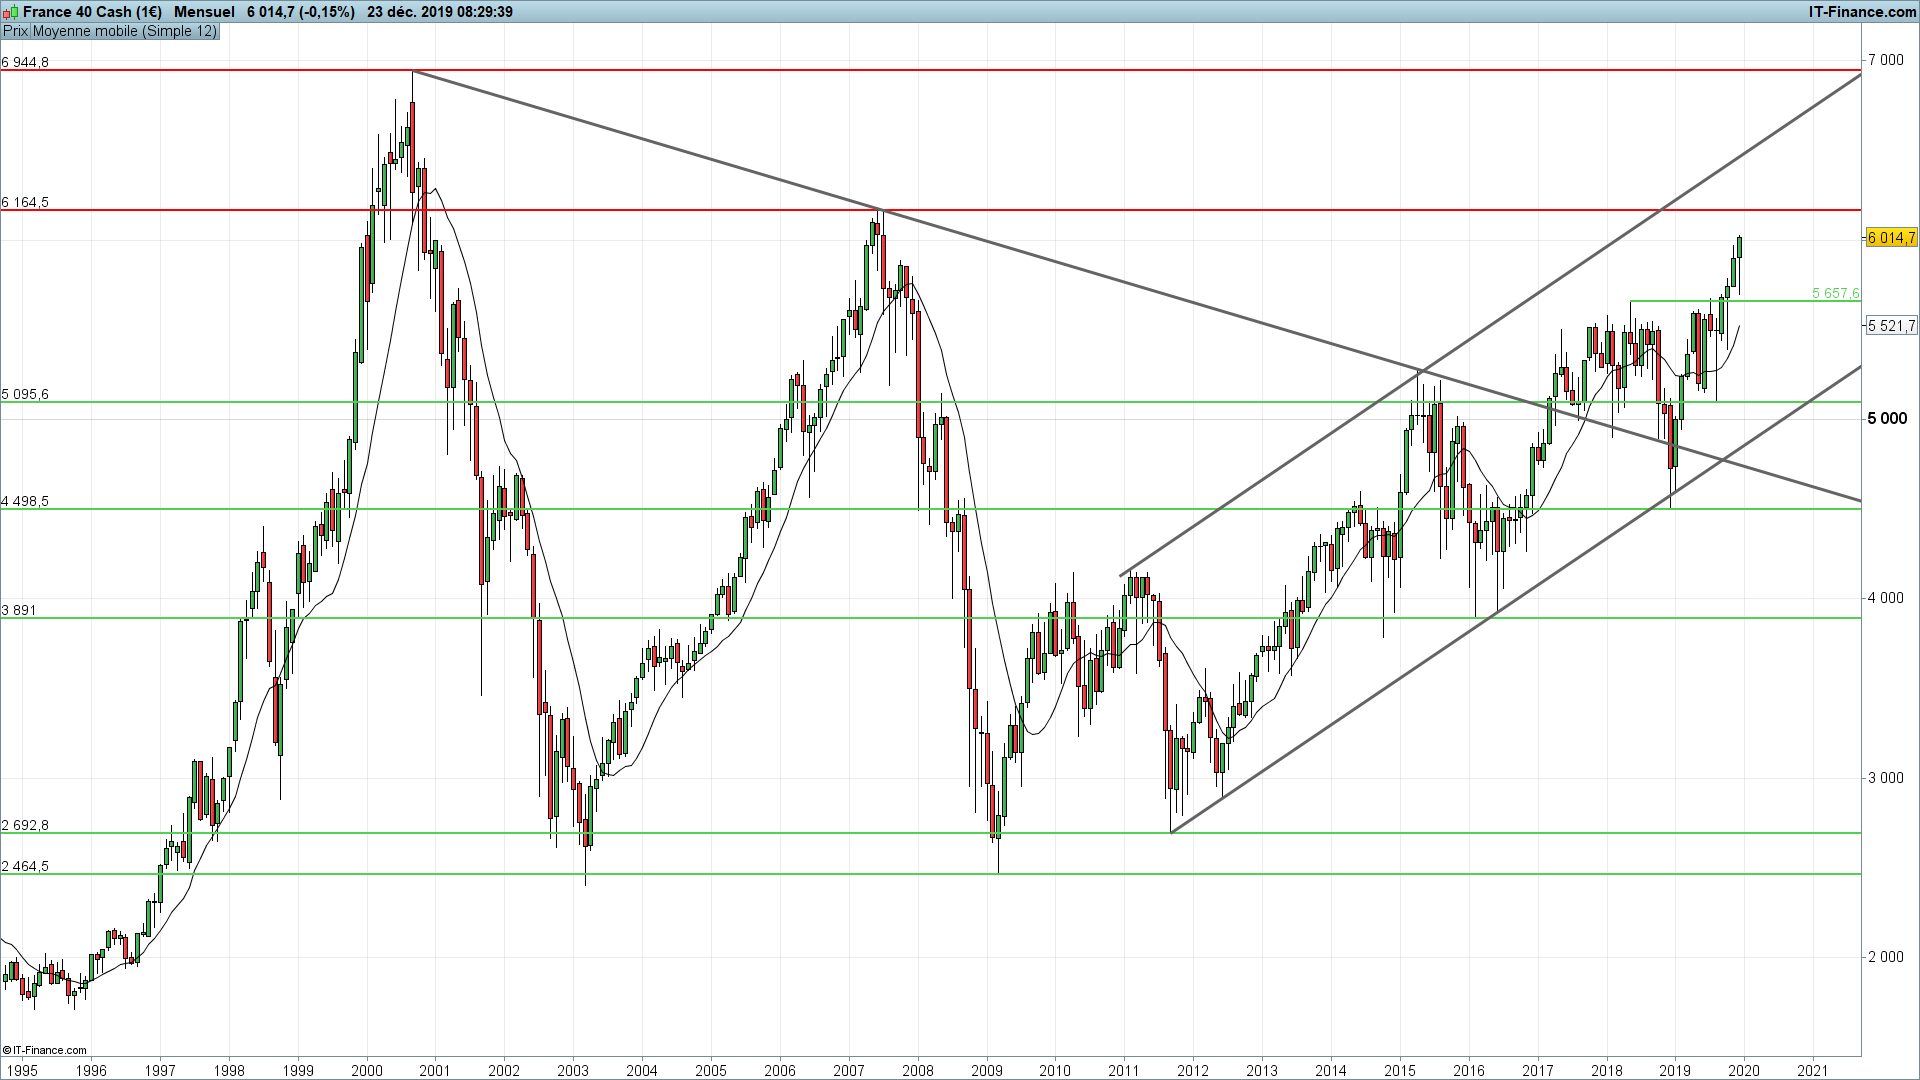 Analyse technique long terme CAC 40